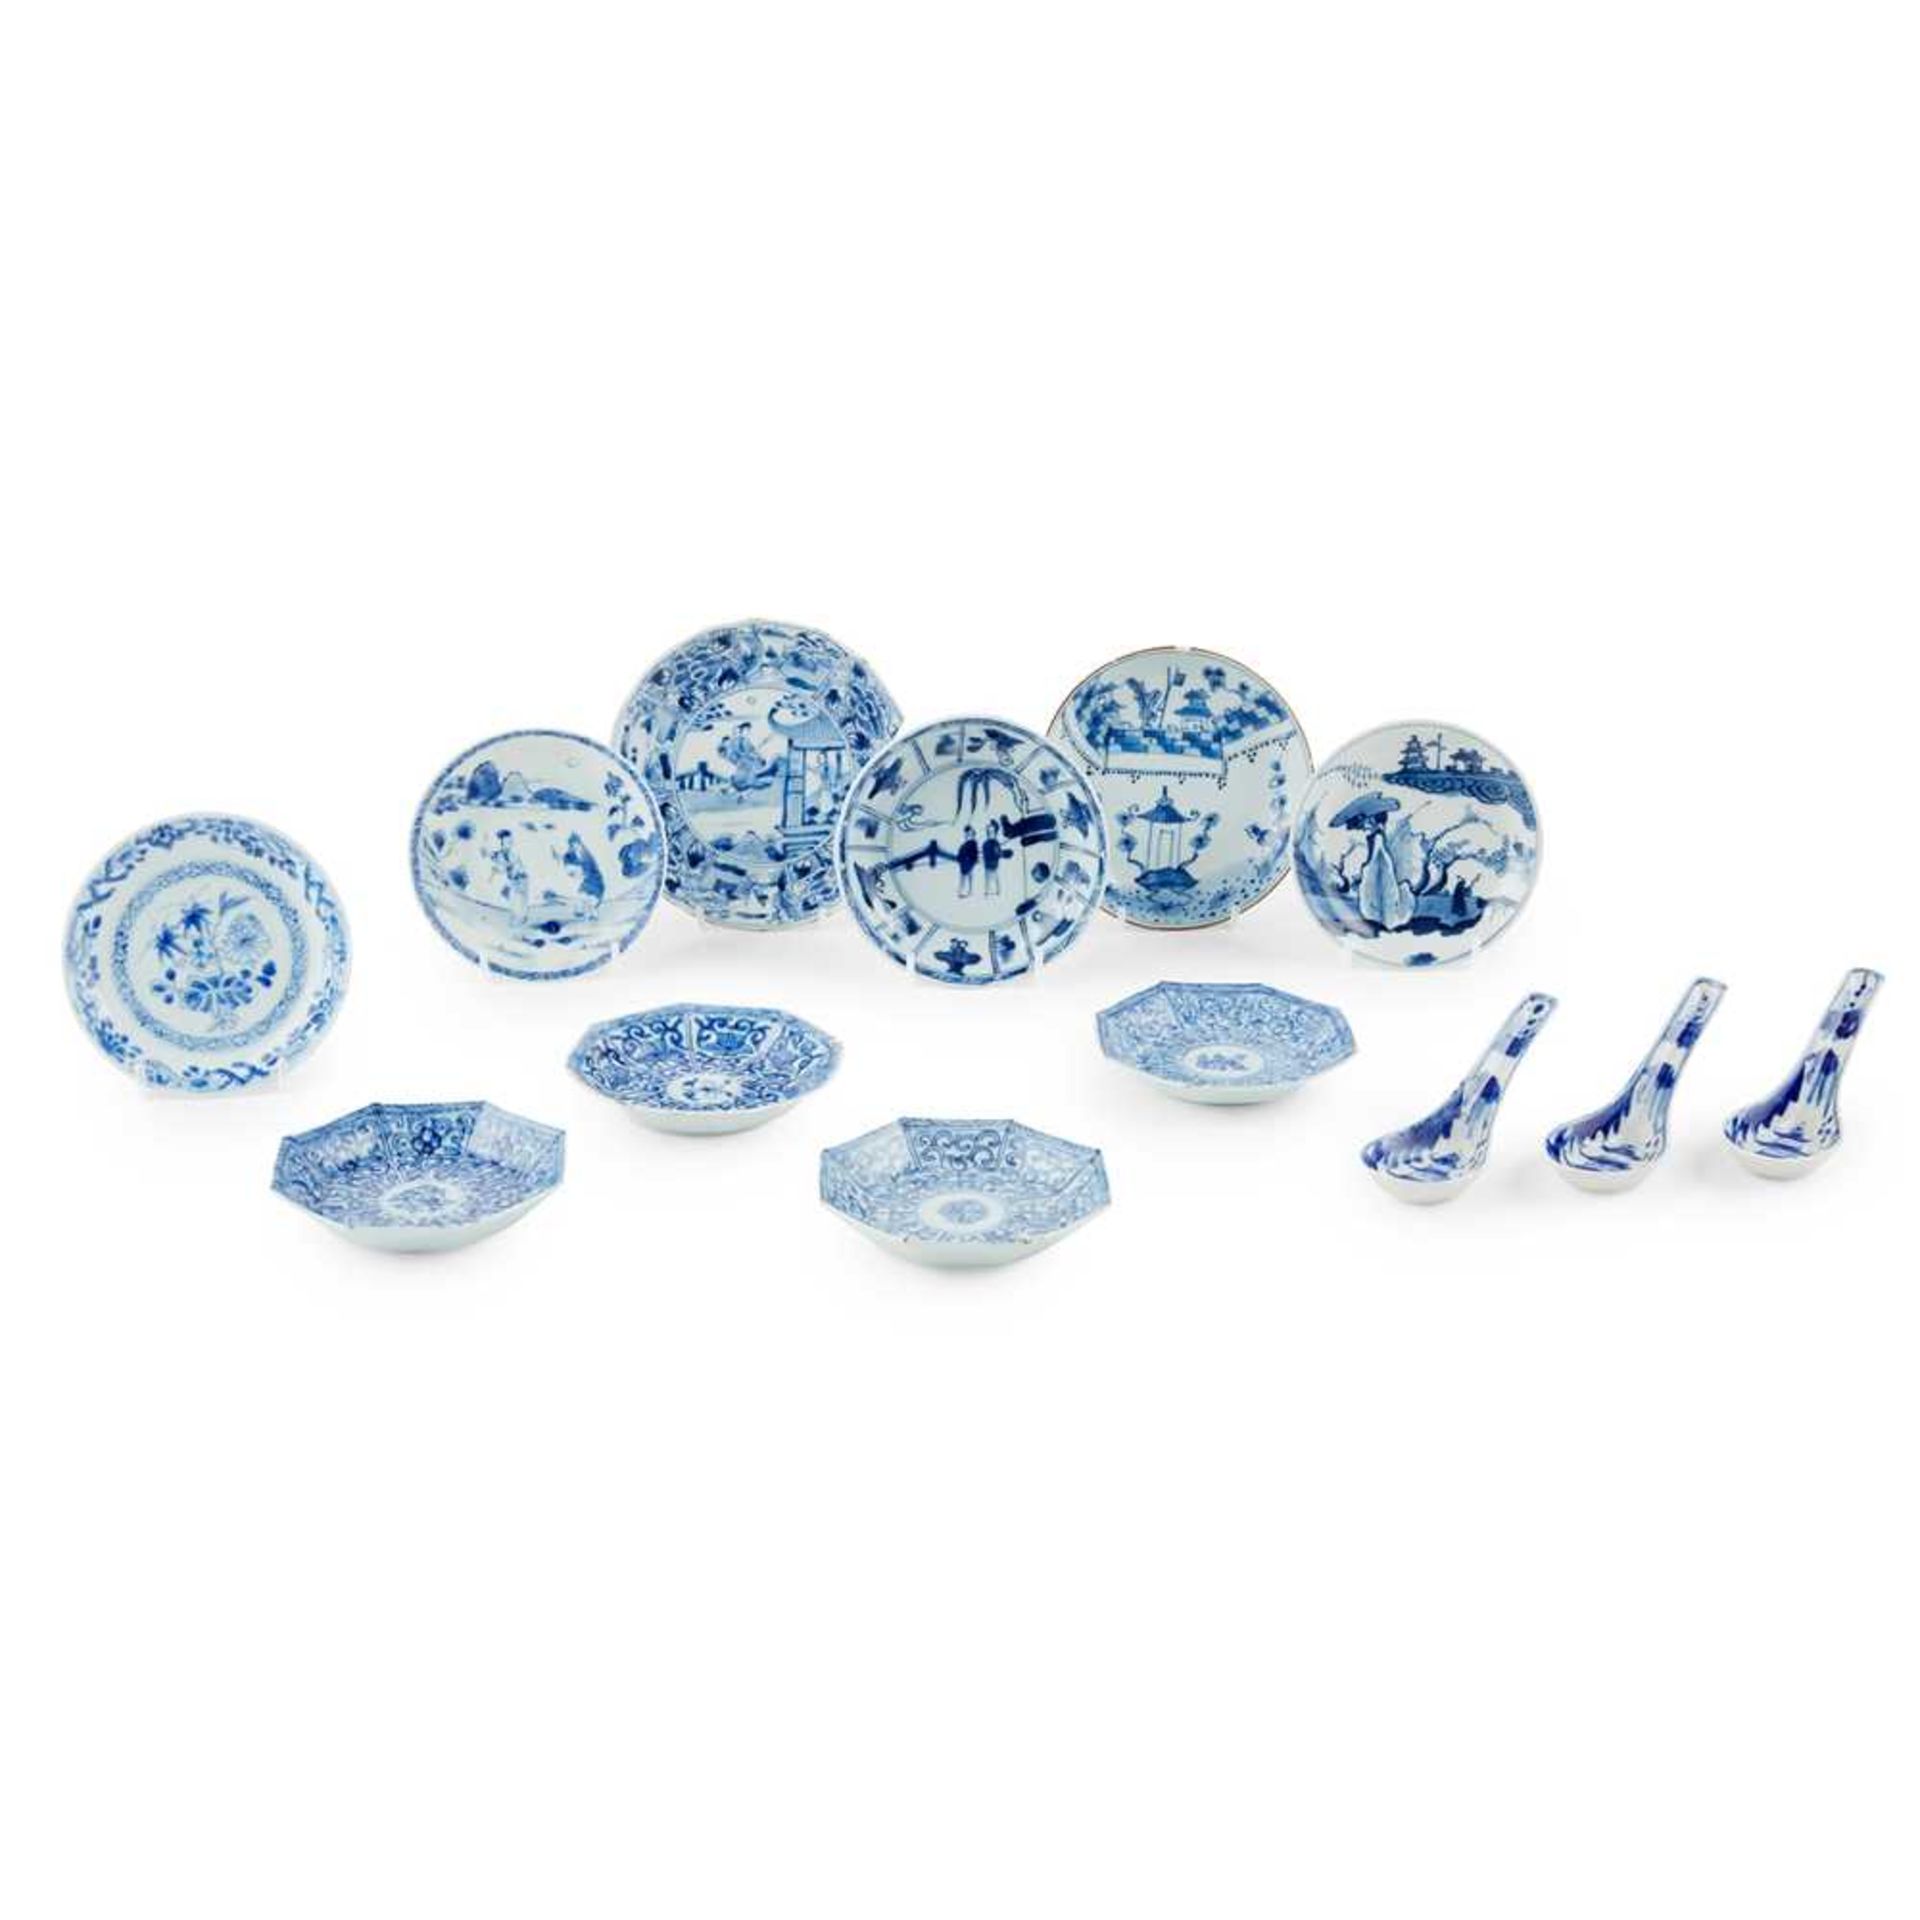 GROUP OF THIRTEEN BLUE AND WHITE WARES